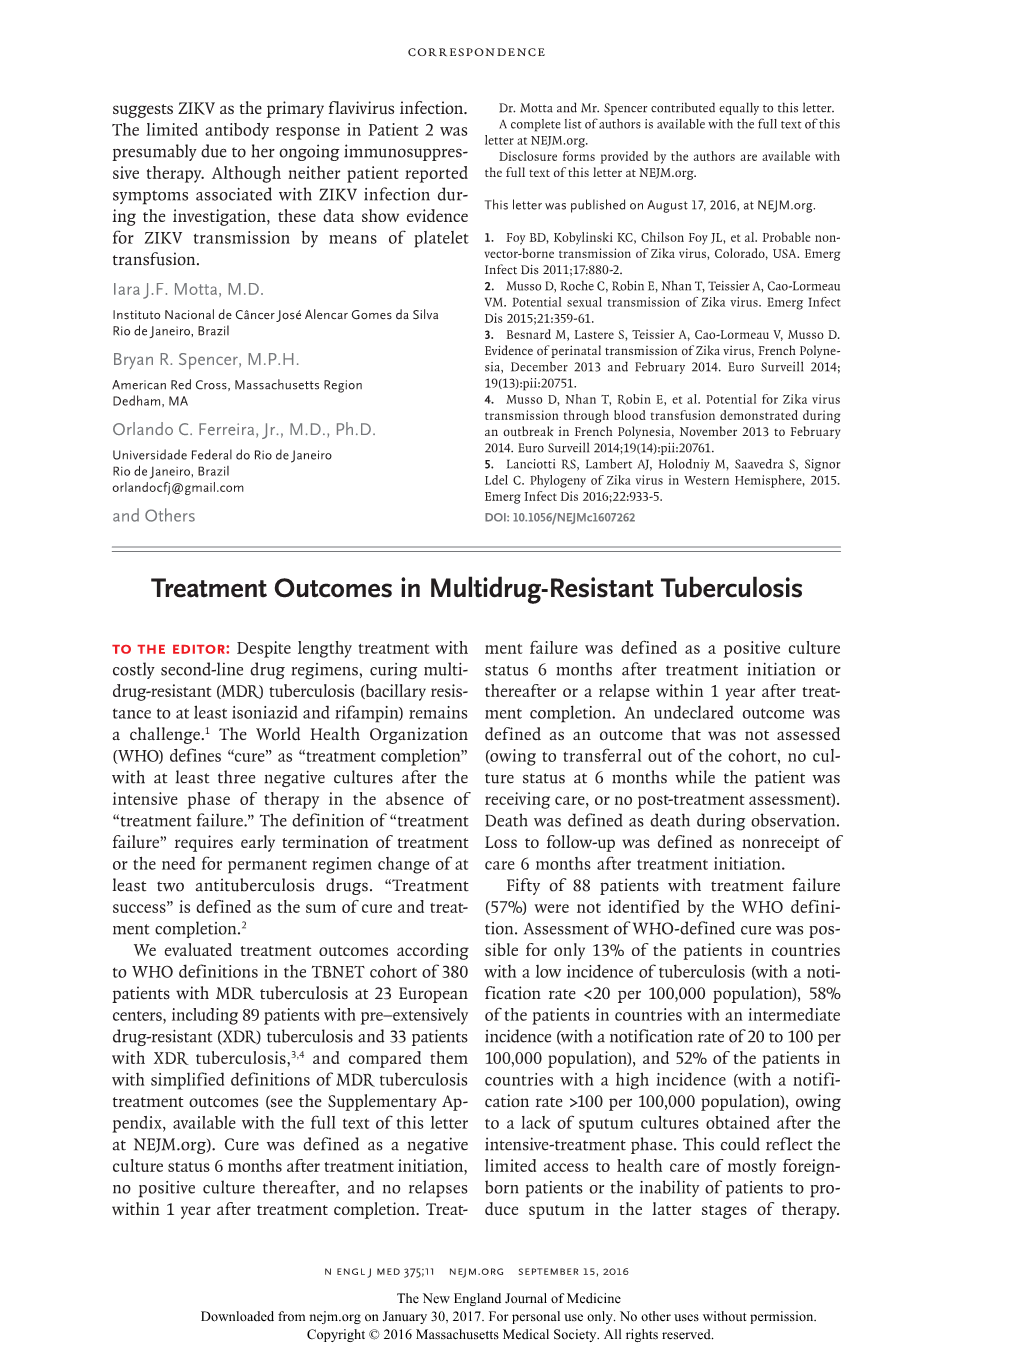 Treatment Outcomes in Multidrug-Resistant Tuberculosis